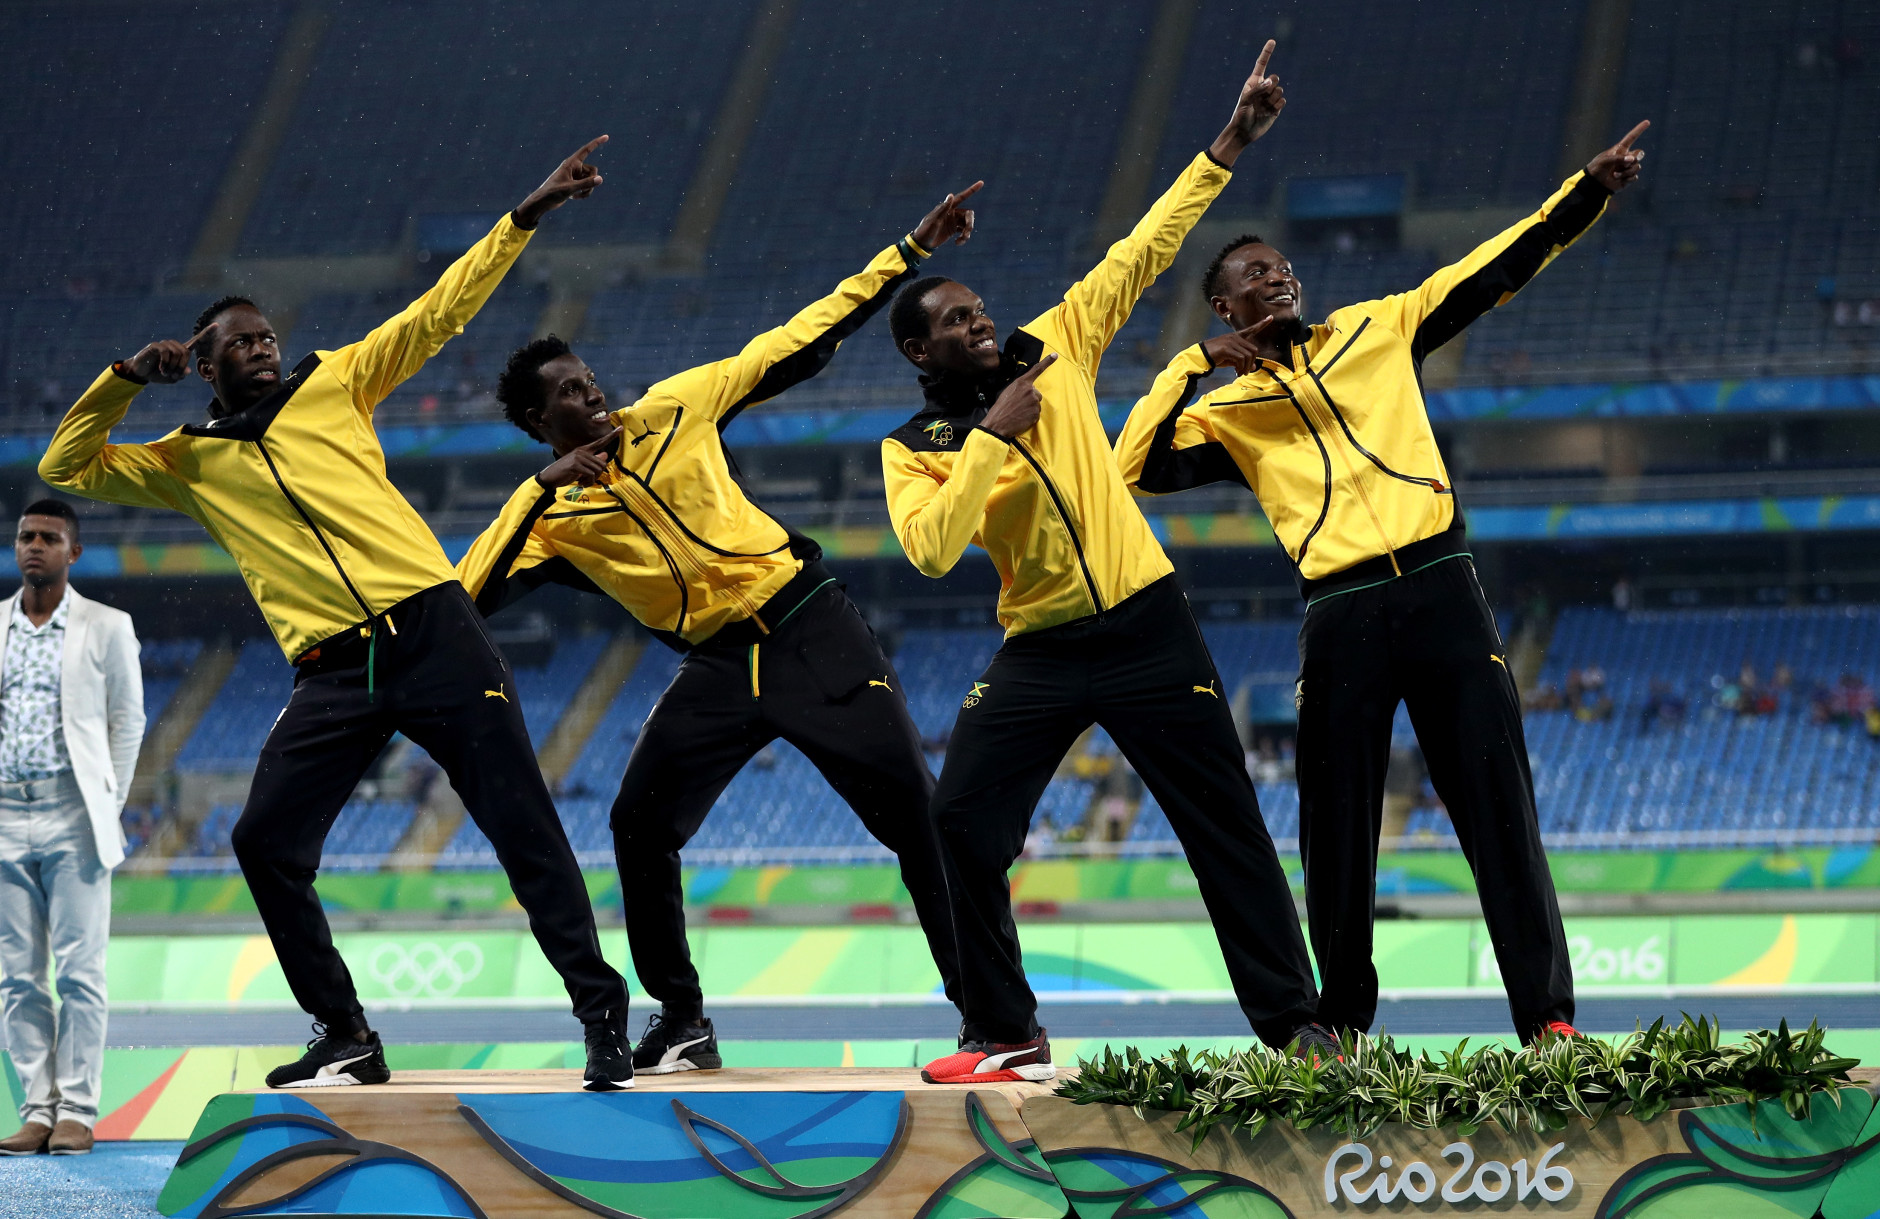 RIO DE JANEIRO, BRAZIL - AUGUST 20:  Silver medalists Peter Matthews, Javon Francis, Naton Allen and Fitzroy Dunkley of Jamaica stand on the podium during the medal ceremony for the Men's 4 x 400 meter Relay on Day 15 of the Rio 2016 Olympic Games at the Olympic Stadium on August 20, 2016 in Rio de Janeiro, Brazil.  (Photo by Patrick Smith/Getty Images)